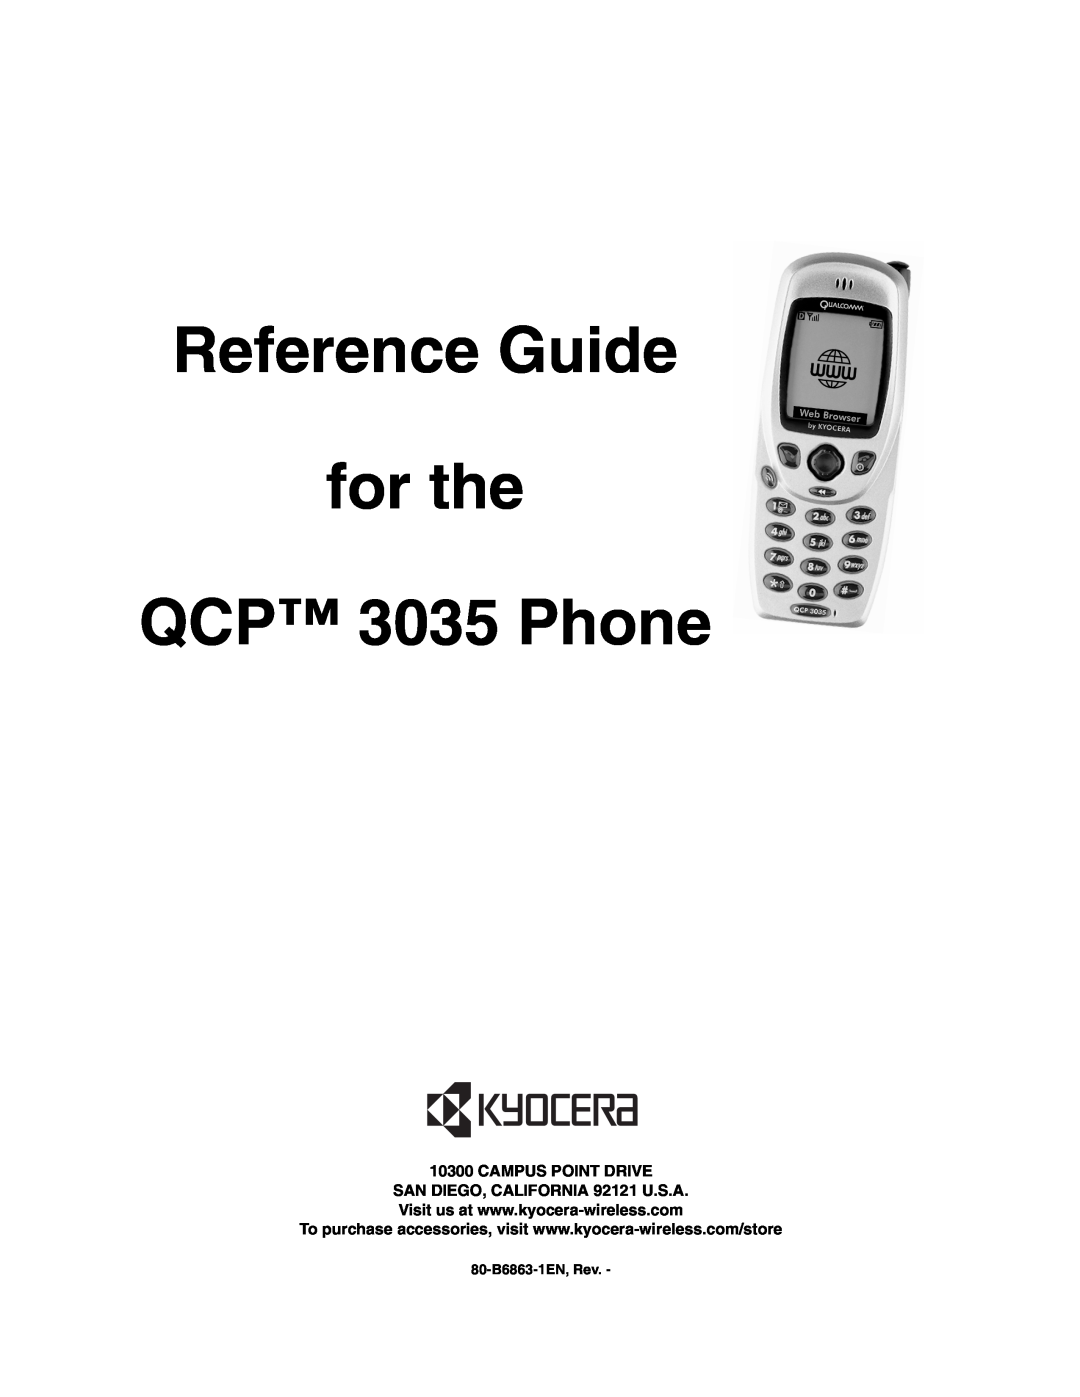 Kyocera manual Reference Guide for the QCP 3035 Phone, Campus Point Drive, 80-B6863-1EN, Rev 